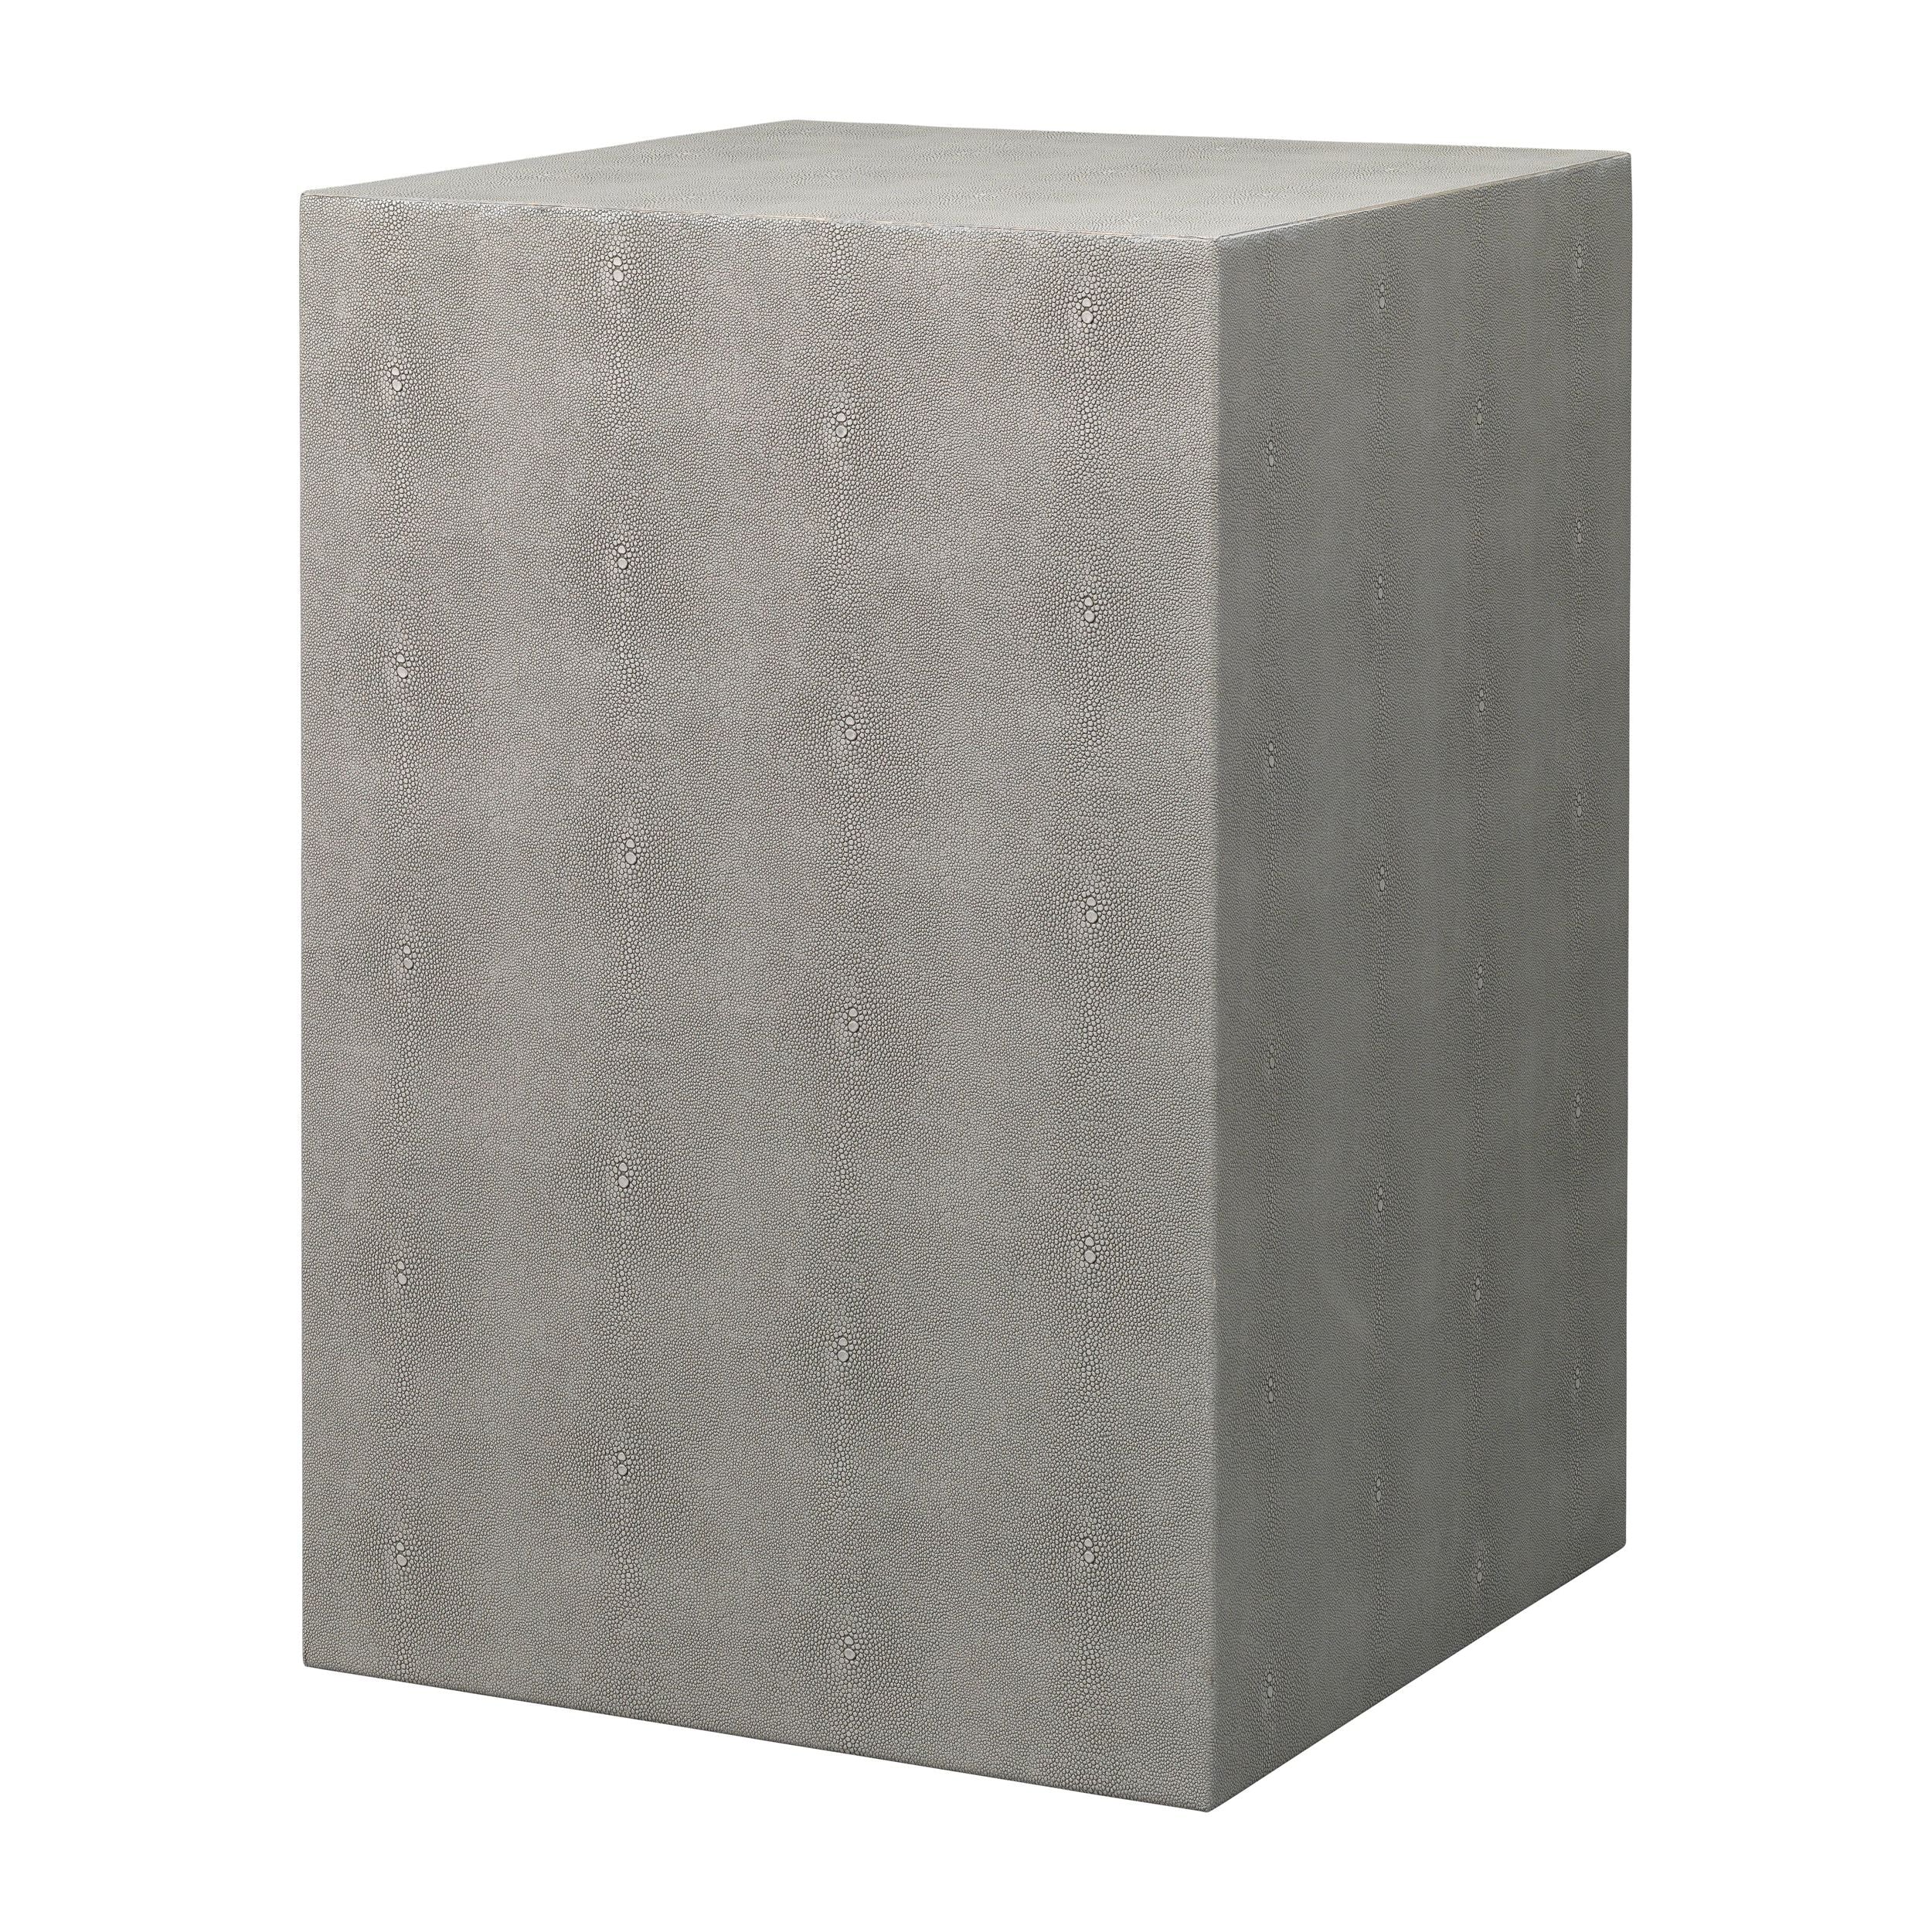 Jamie Young Company - LS20STRUSQGR - Structure Square Side Table - Structure - Grey